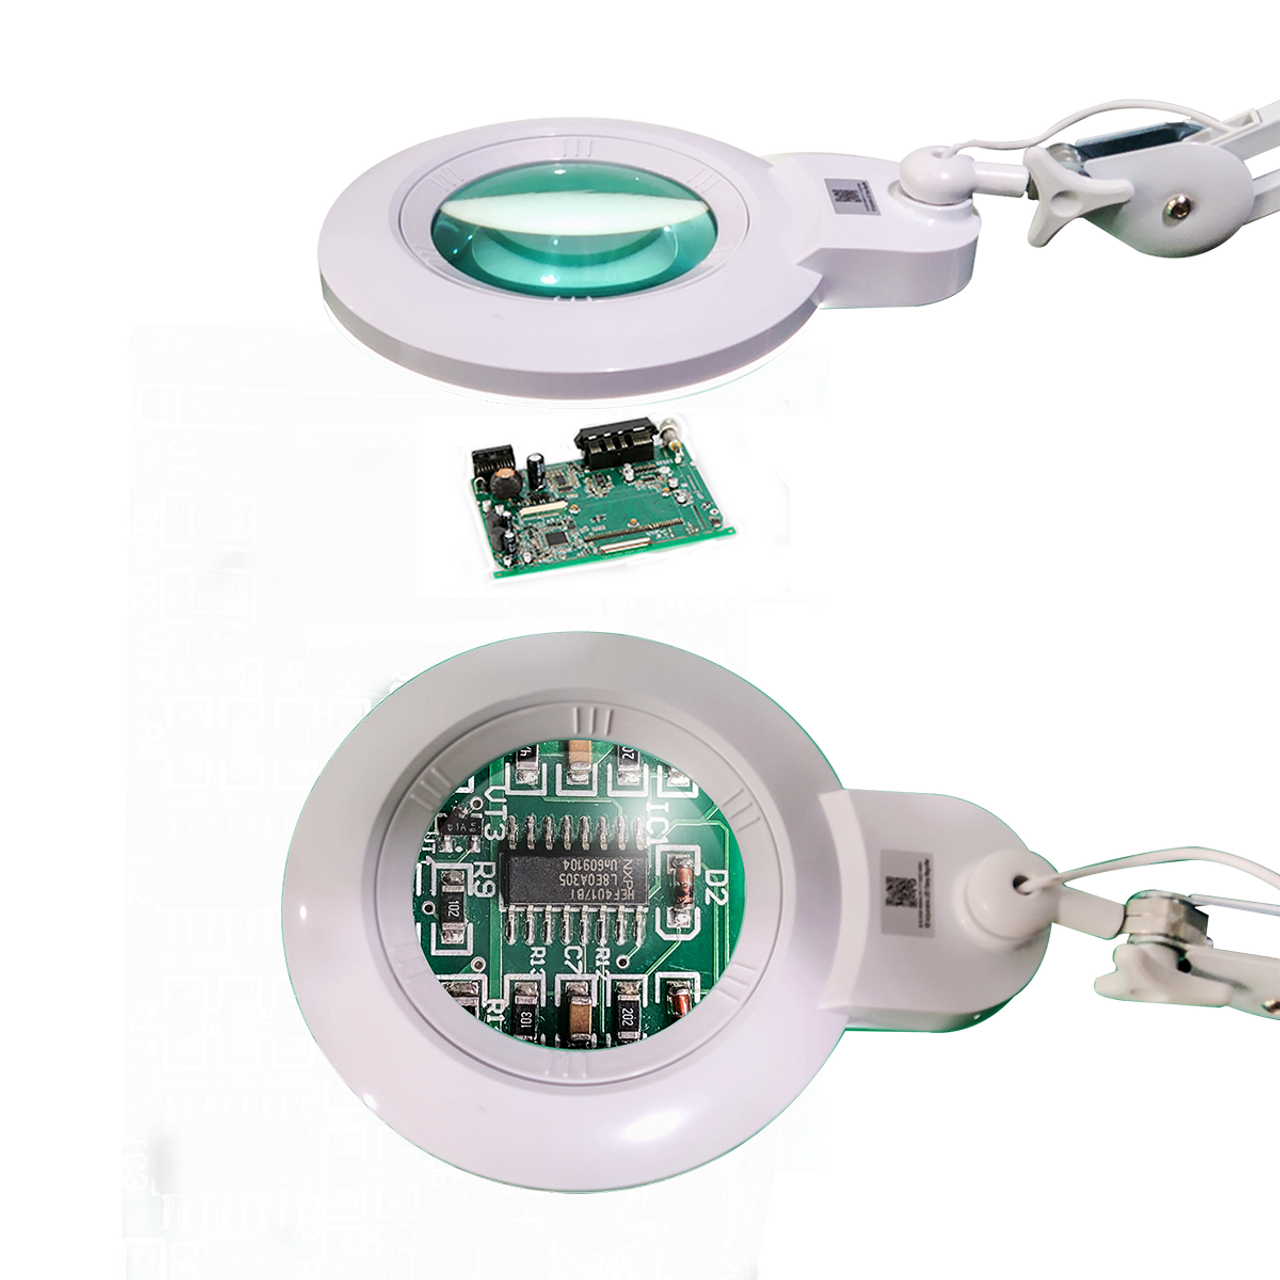 1.75x Desktop Magnifying Lamp with LED